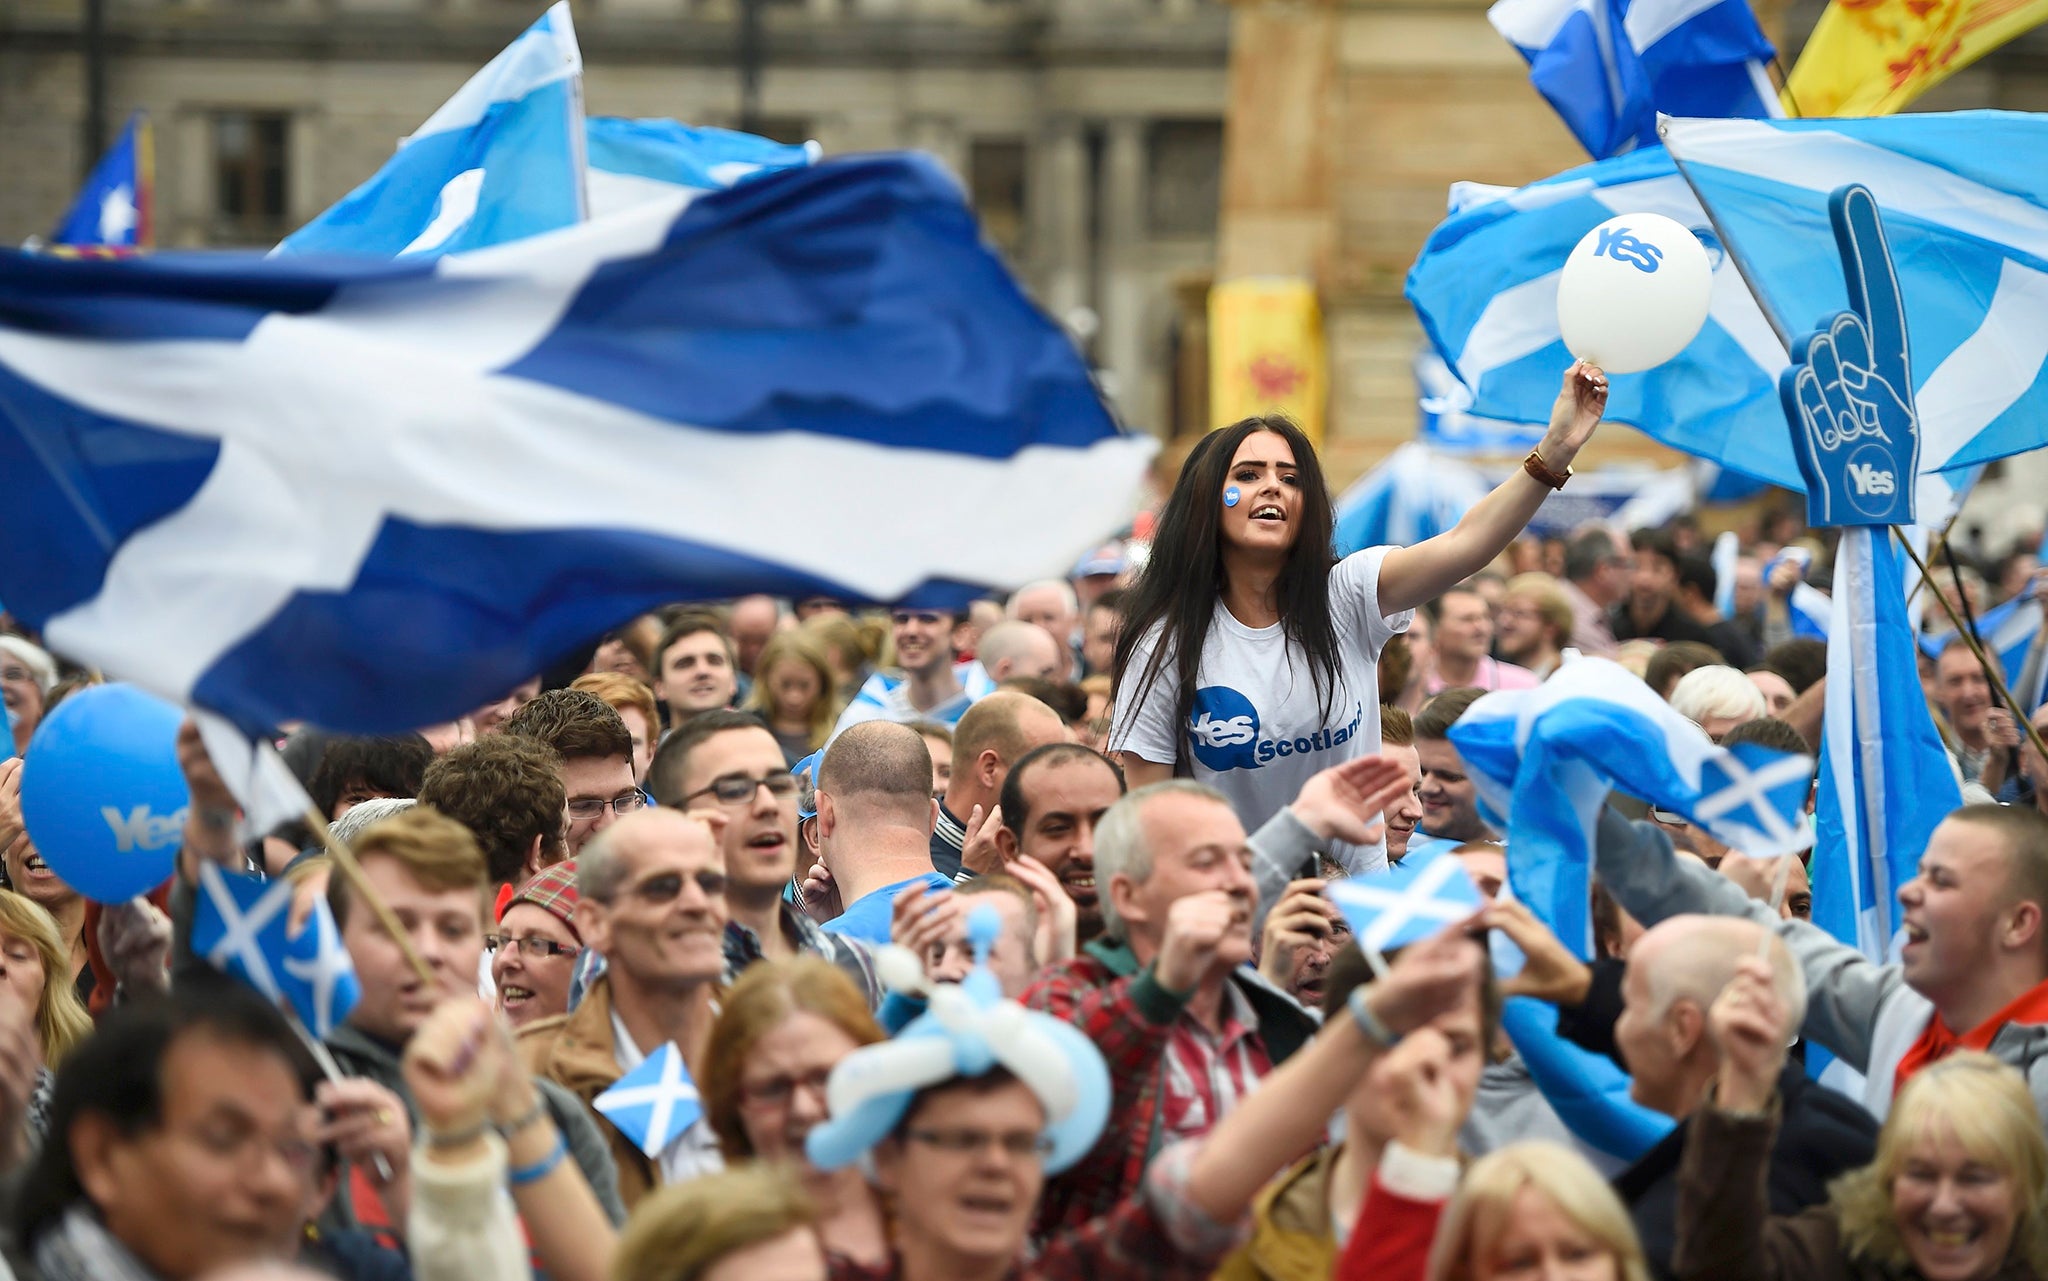 The campaign has left much of Scotland divided